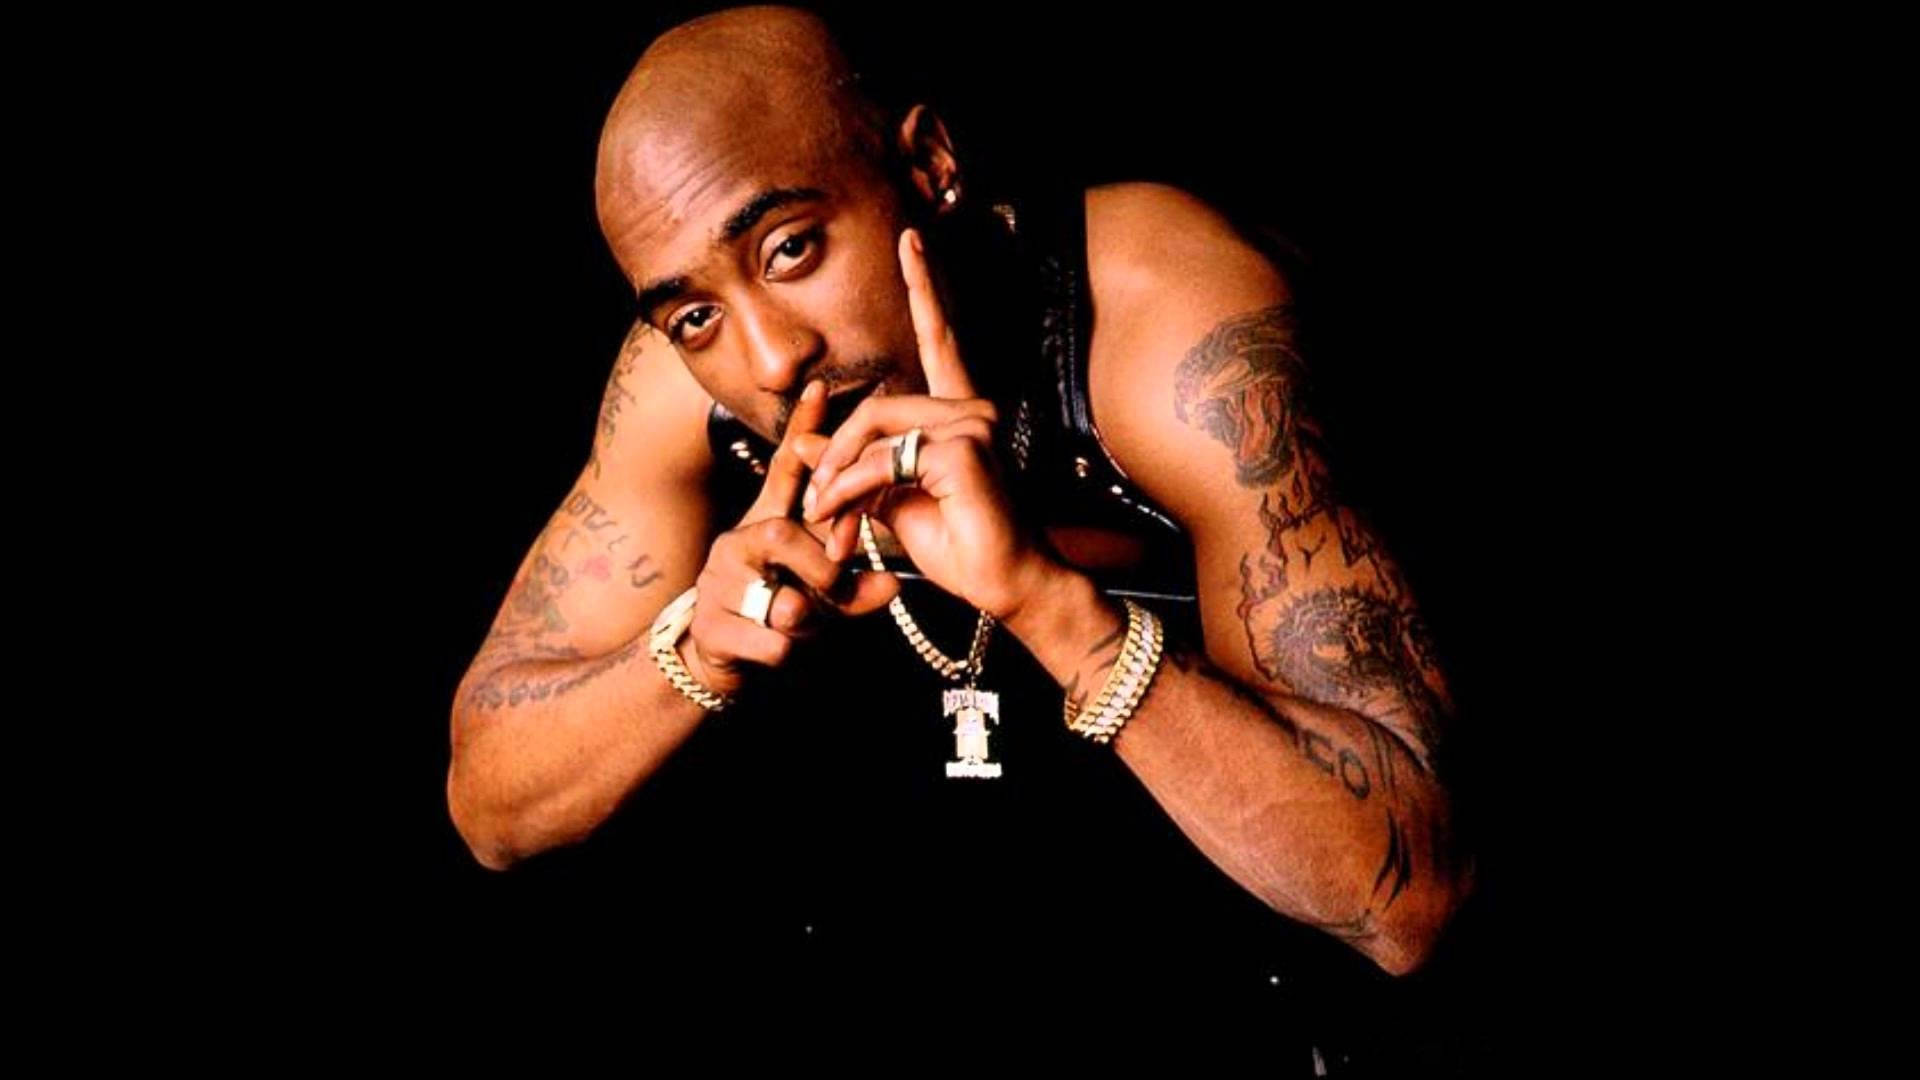 "A true legend, Tupac's legacy continues to grow" Wallpaper